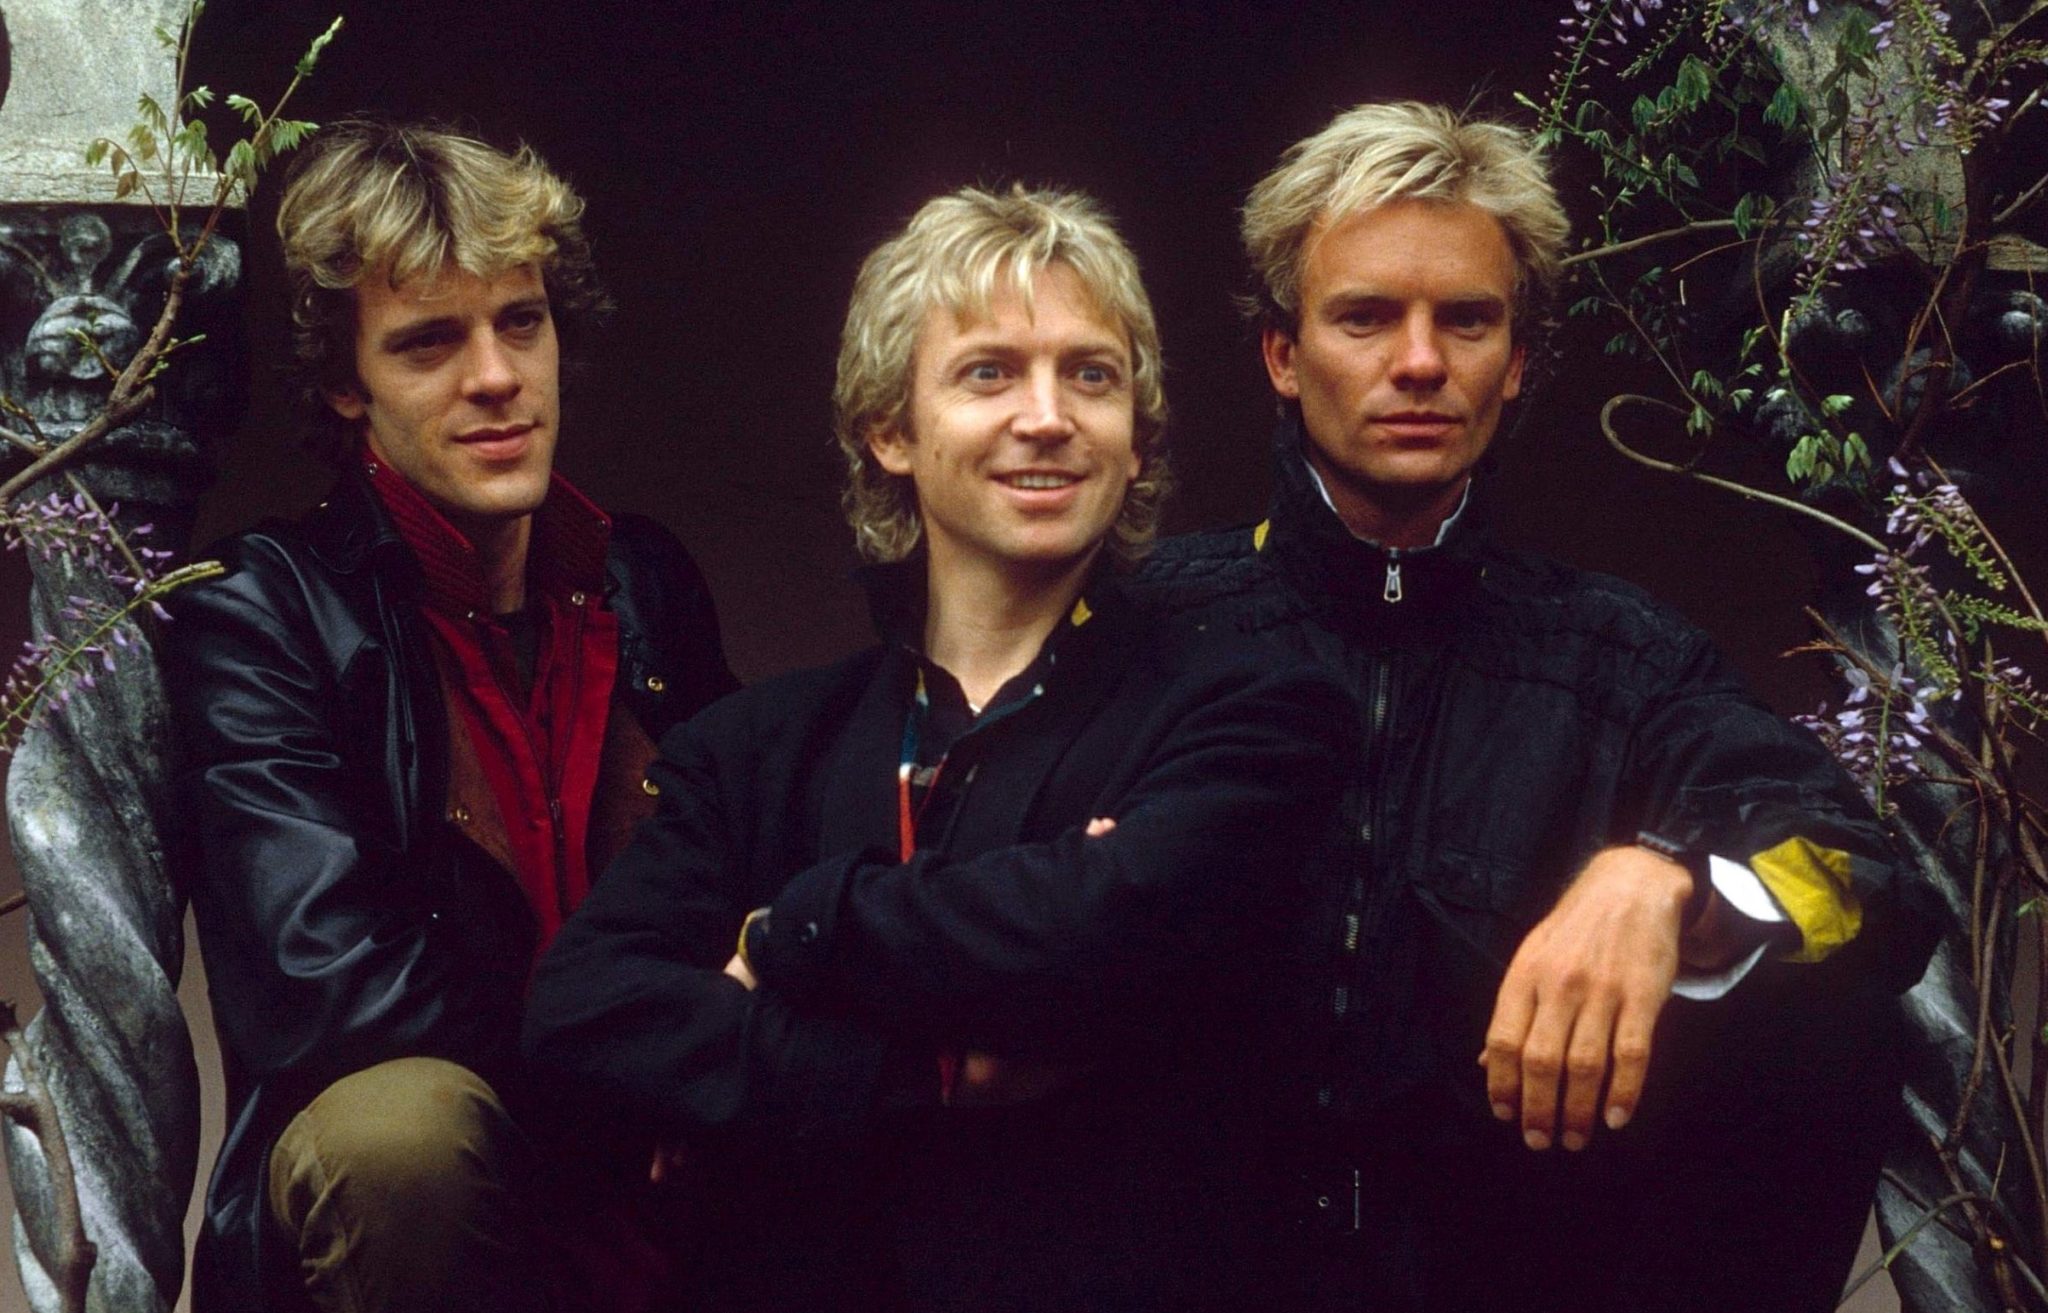 The police фото